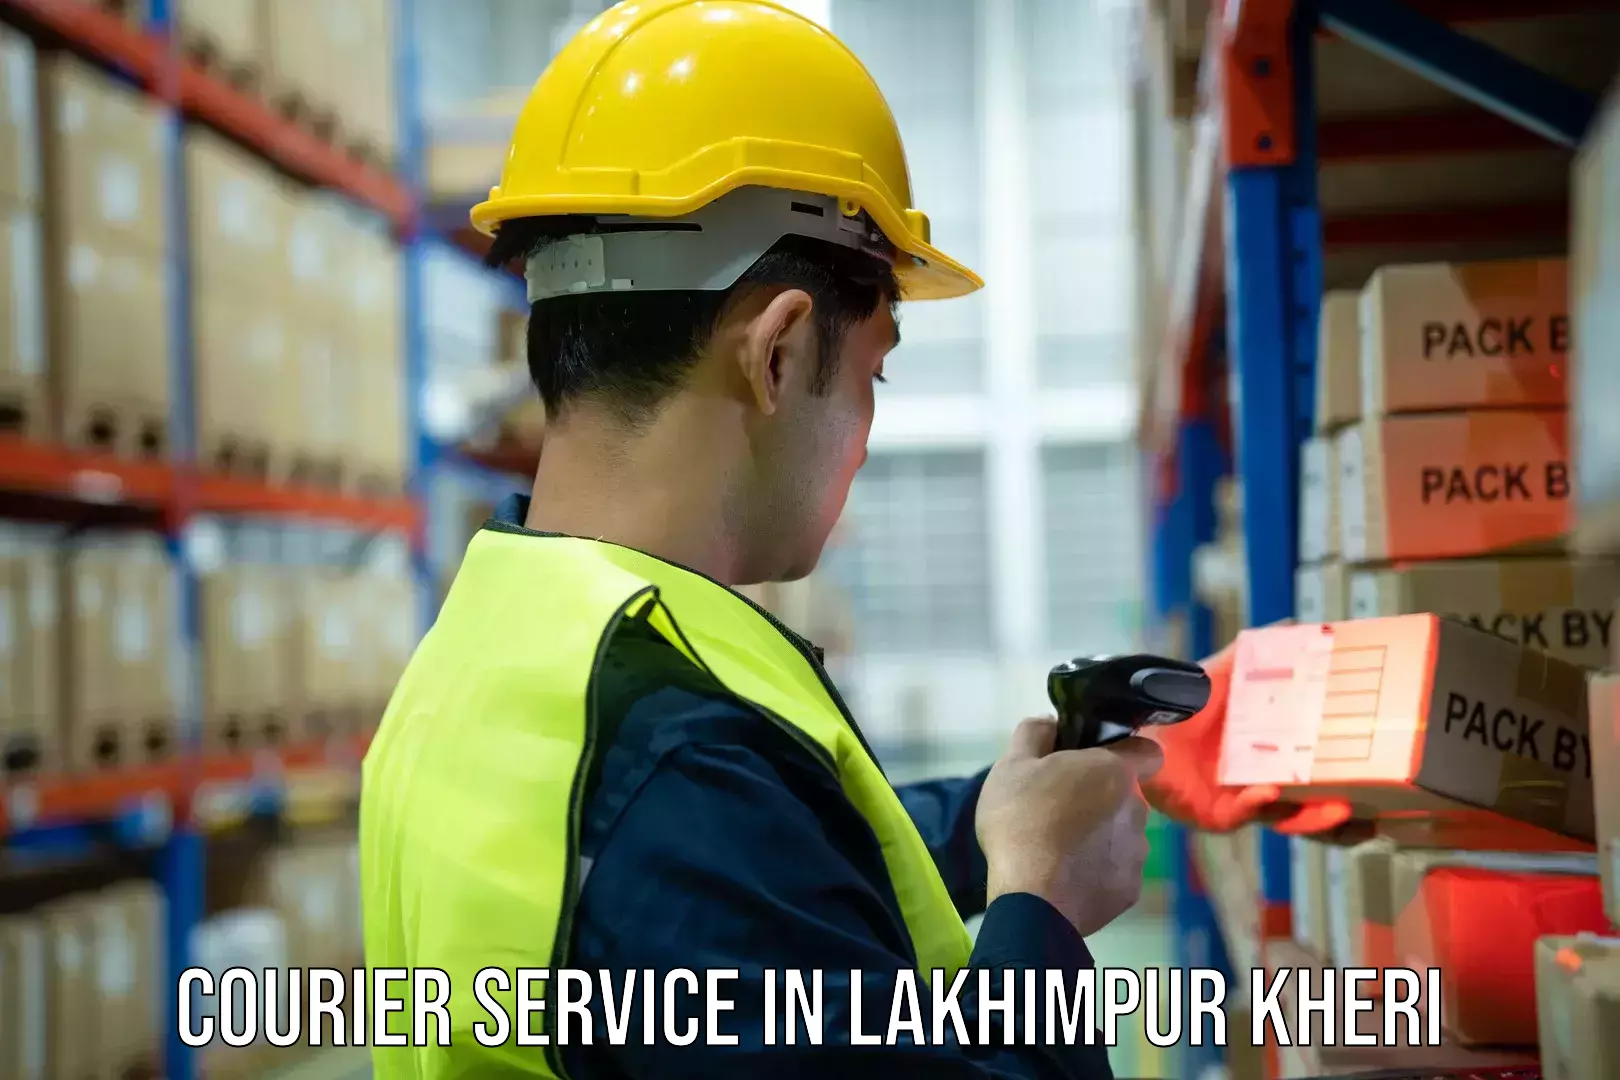 Postal and courier services in Lakhimpur Kheri